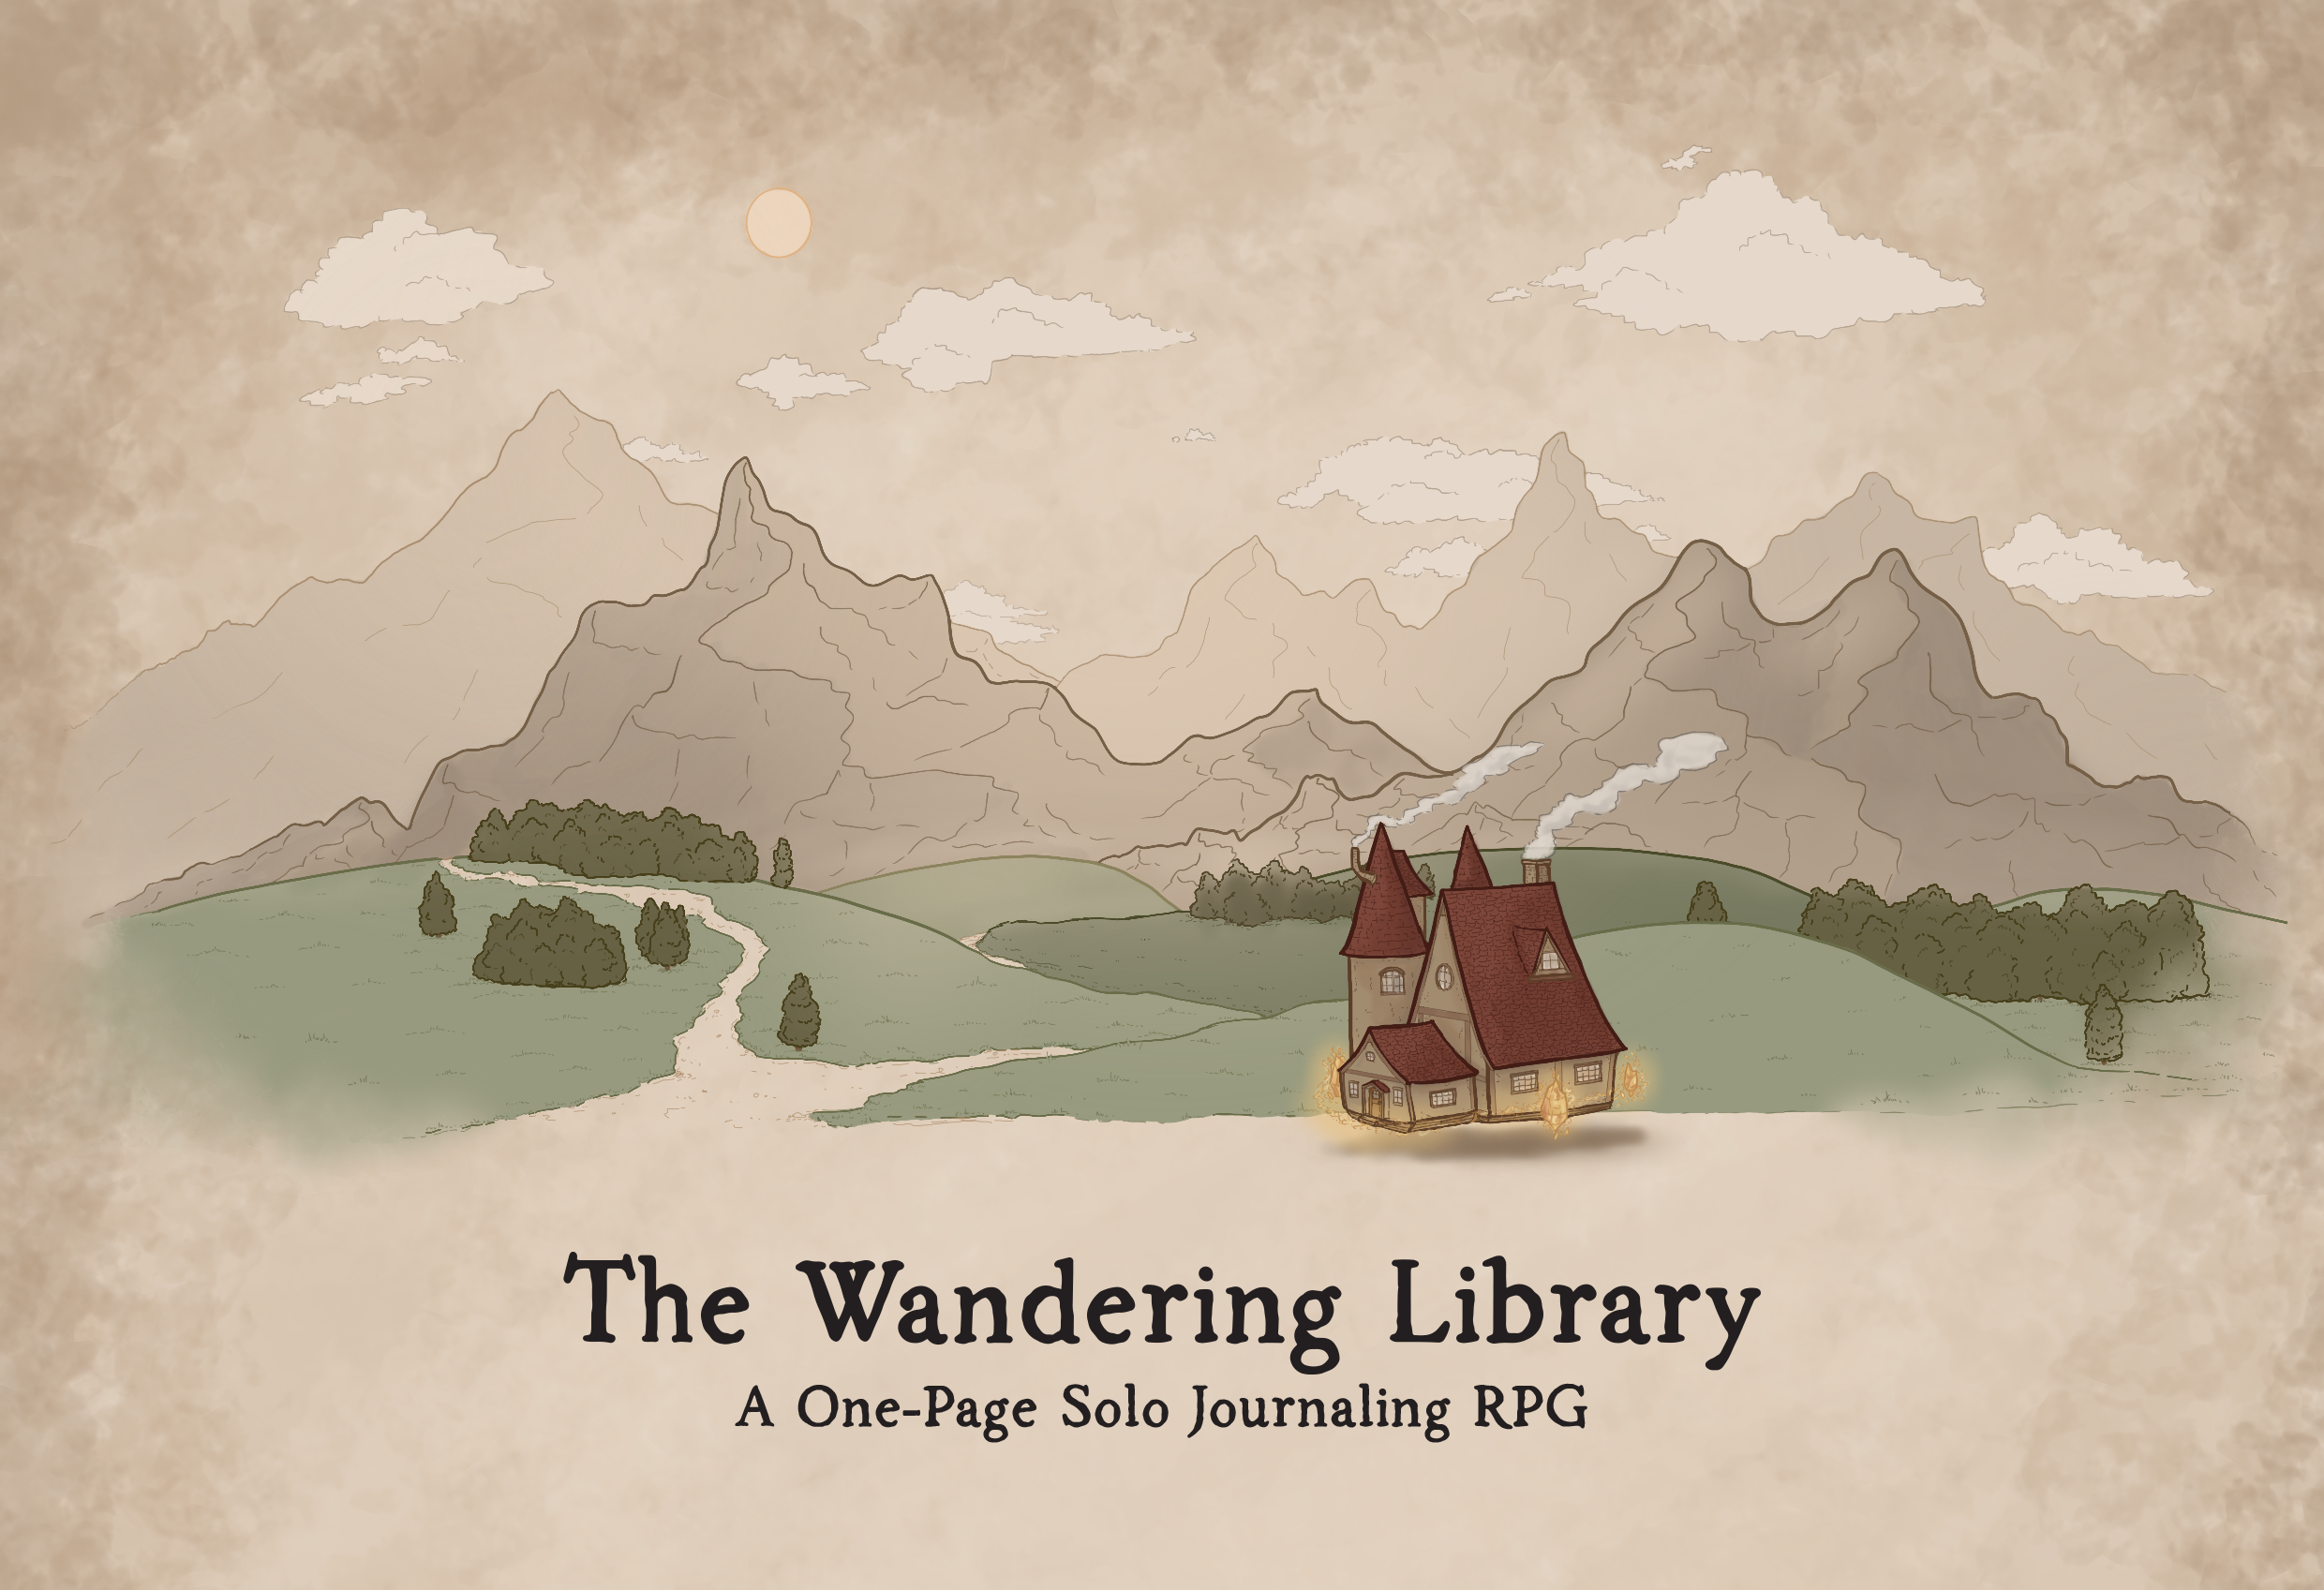 The Wandering Library